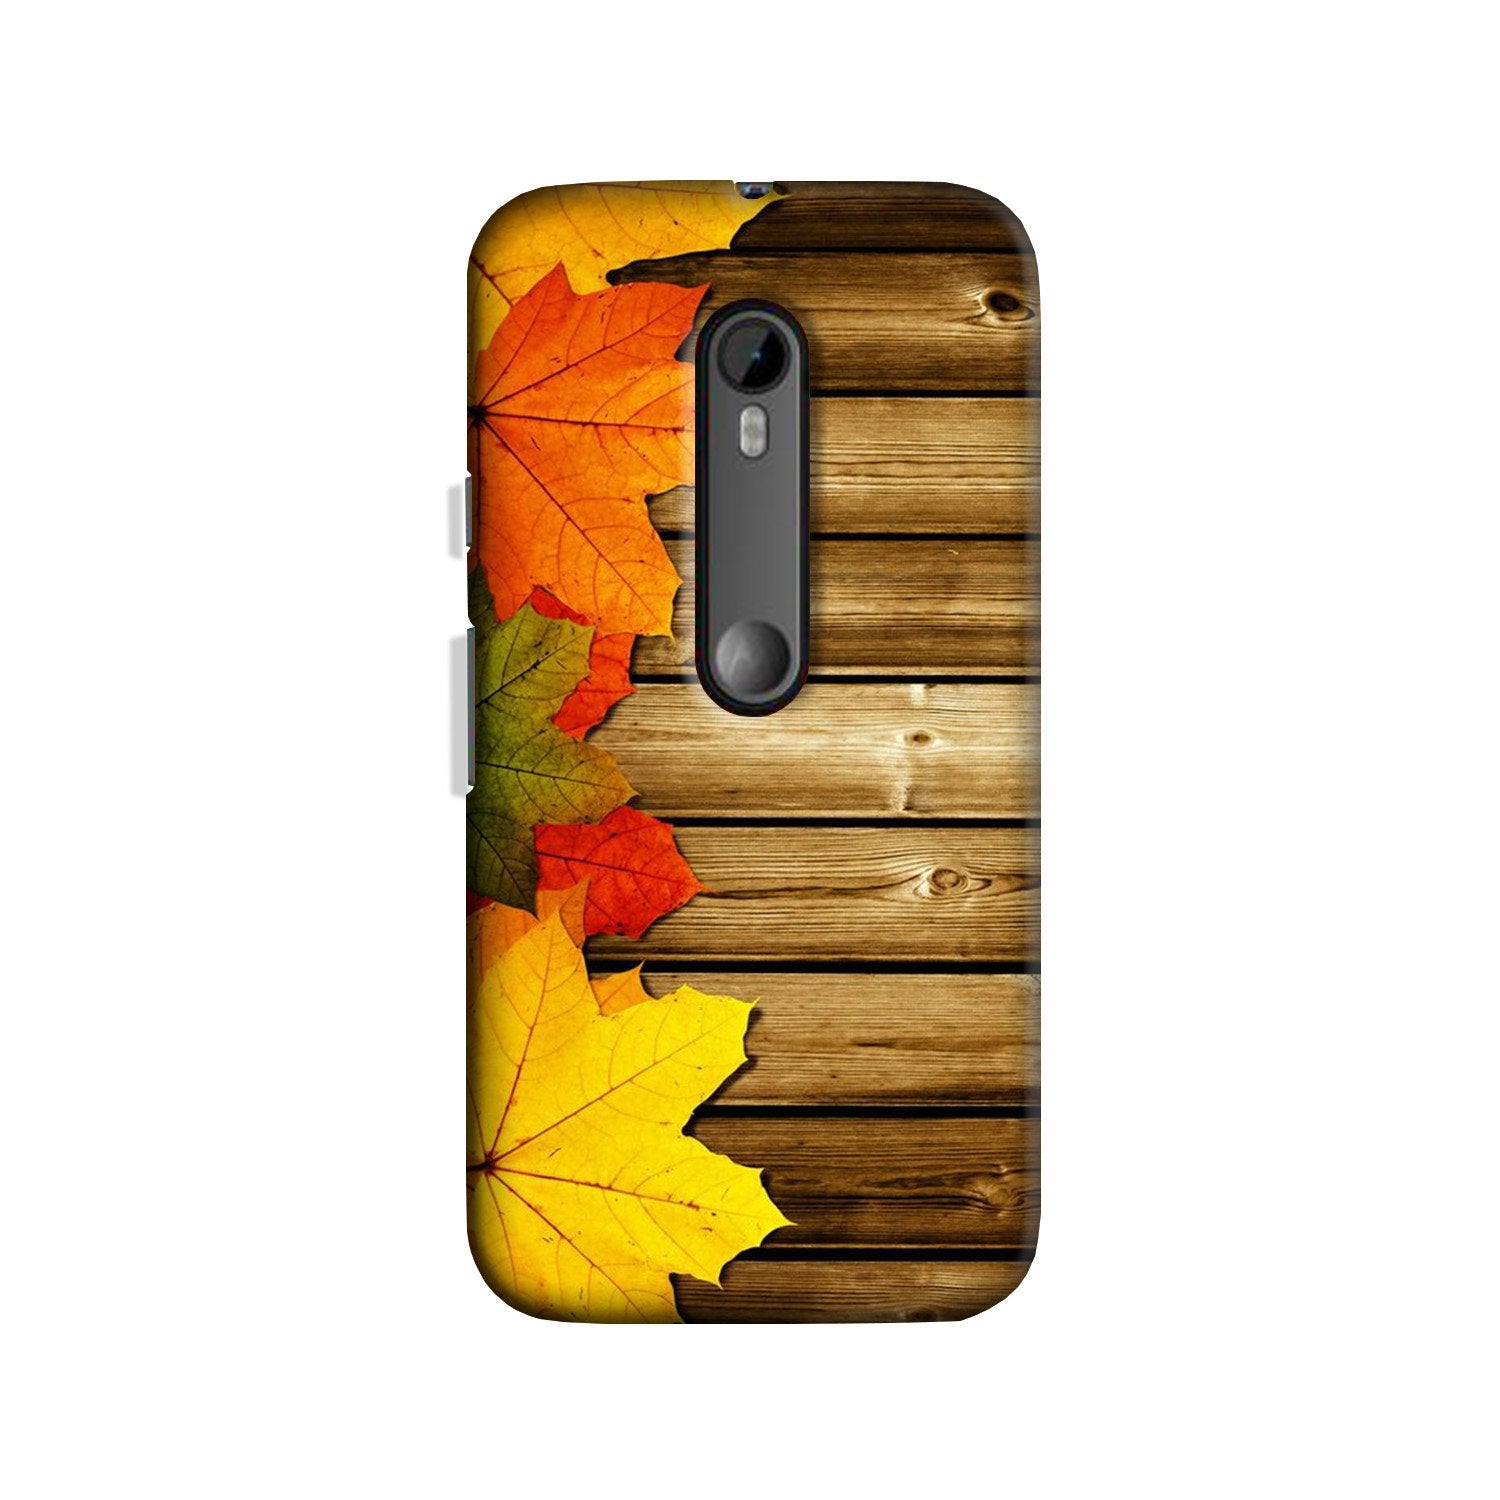 Wooden look3 Case for Moto G3